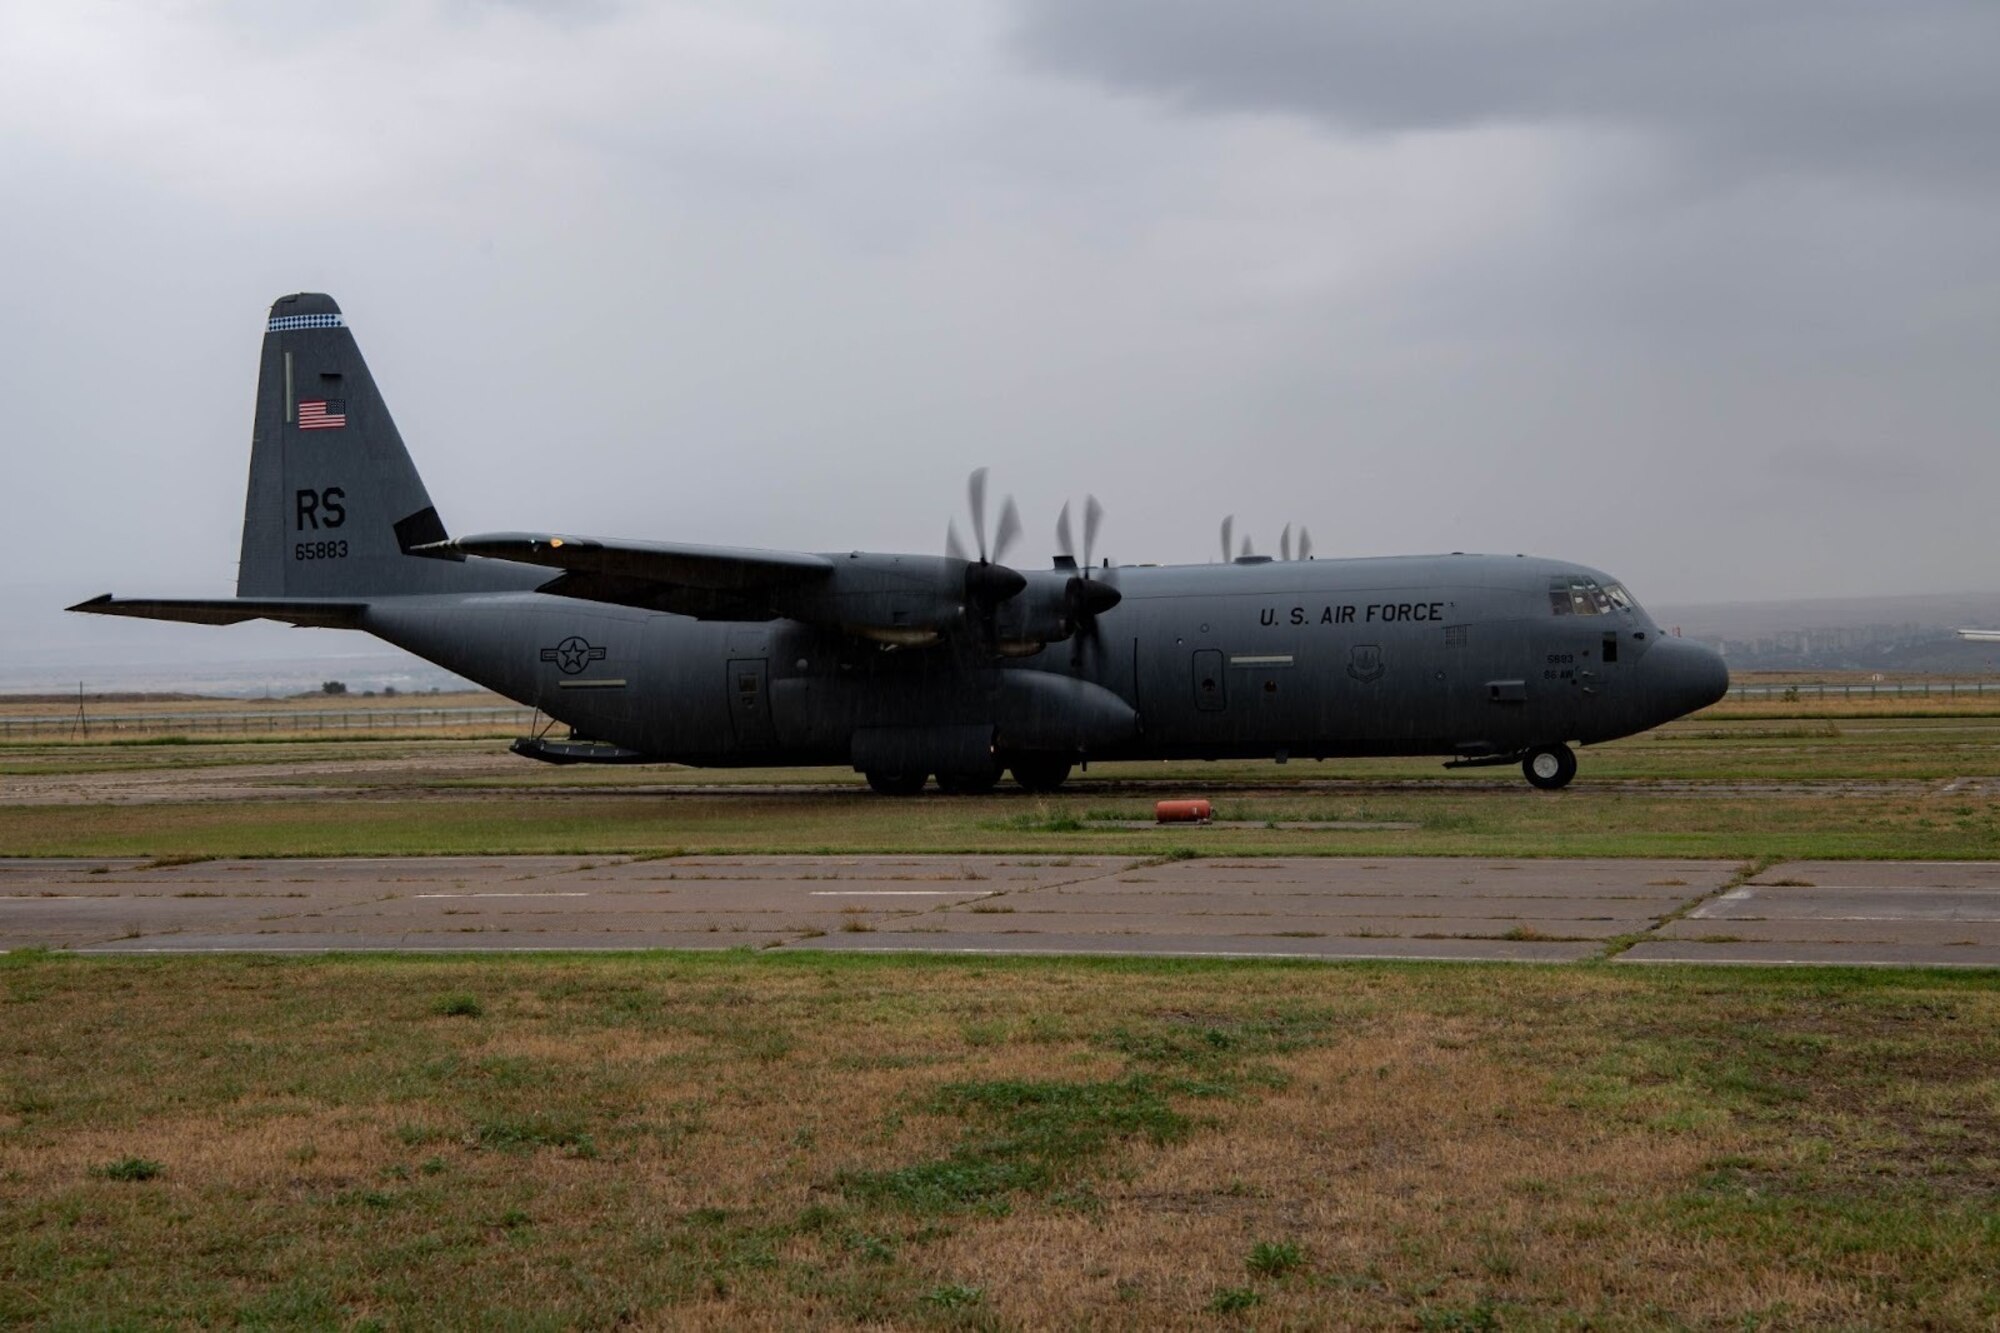 A U.S. Air Force C-130J Super Hercules aircraft sits on an airfield during exercise Agile Spirit 21